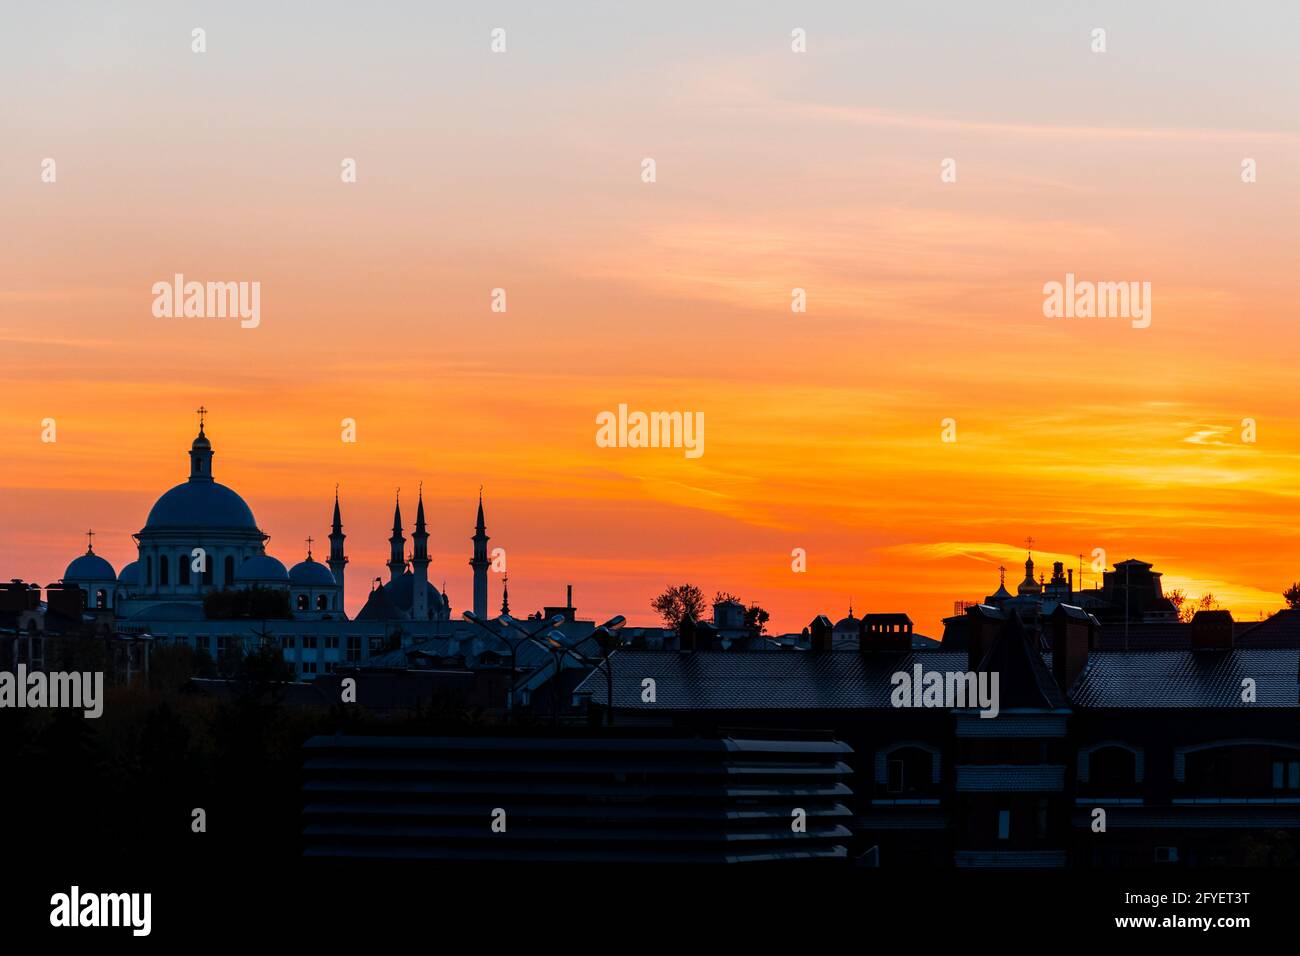 View of the sunset over the historical center of Kazan, the Cathedral of the Kazan Icon of the Mother of God and the minarets of the Kul Sharif Mosque Stock Photo